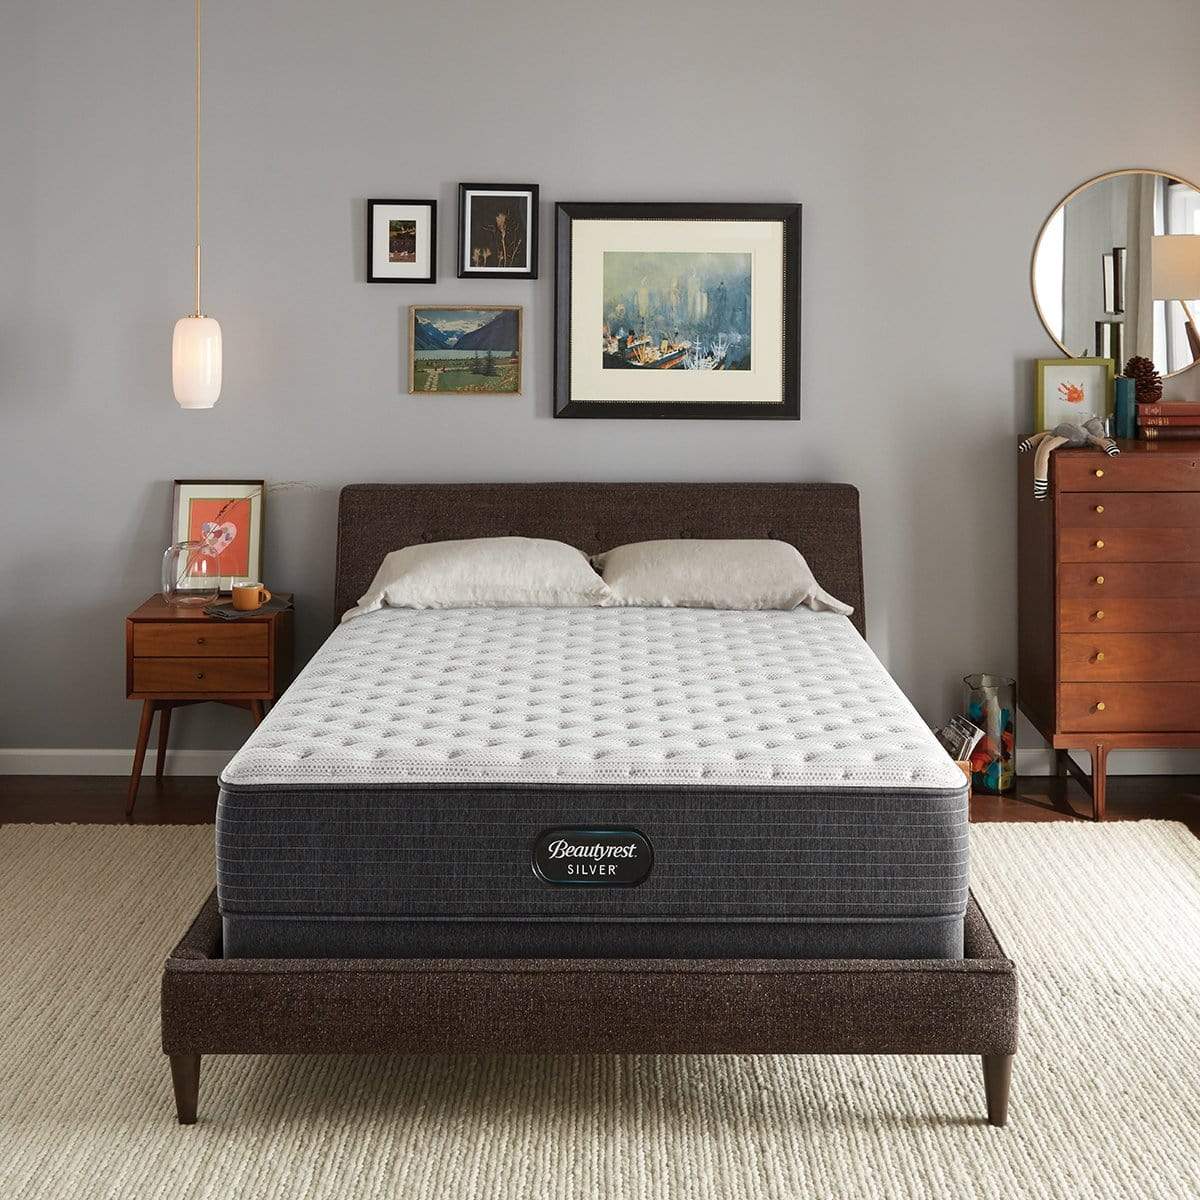 Picture of Beautyrest Silver® BRS900 Extra Firm Mattress